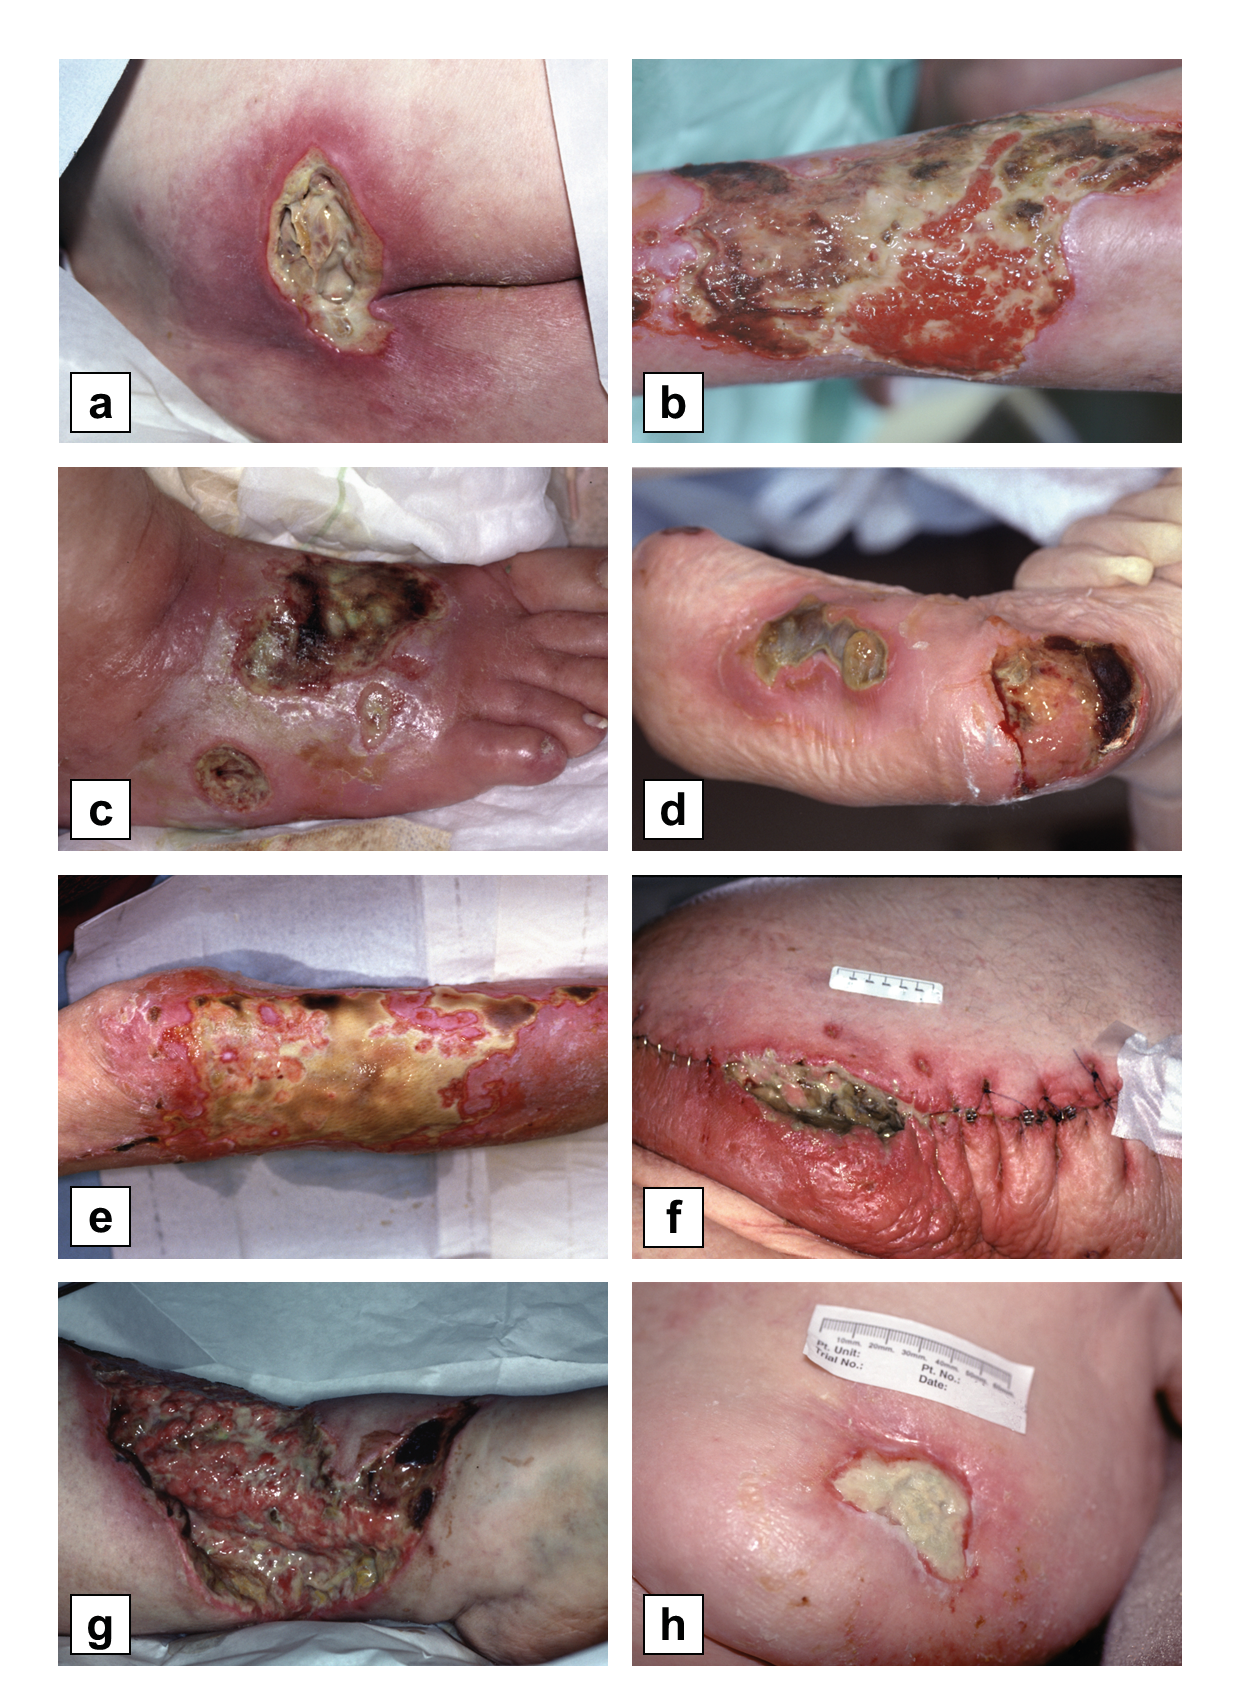 File:Scars of yaws lesions on the legs of a female patient with a